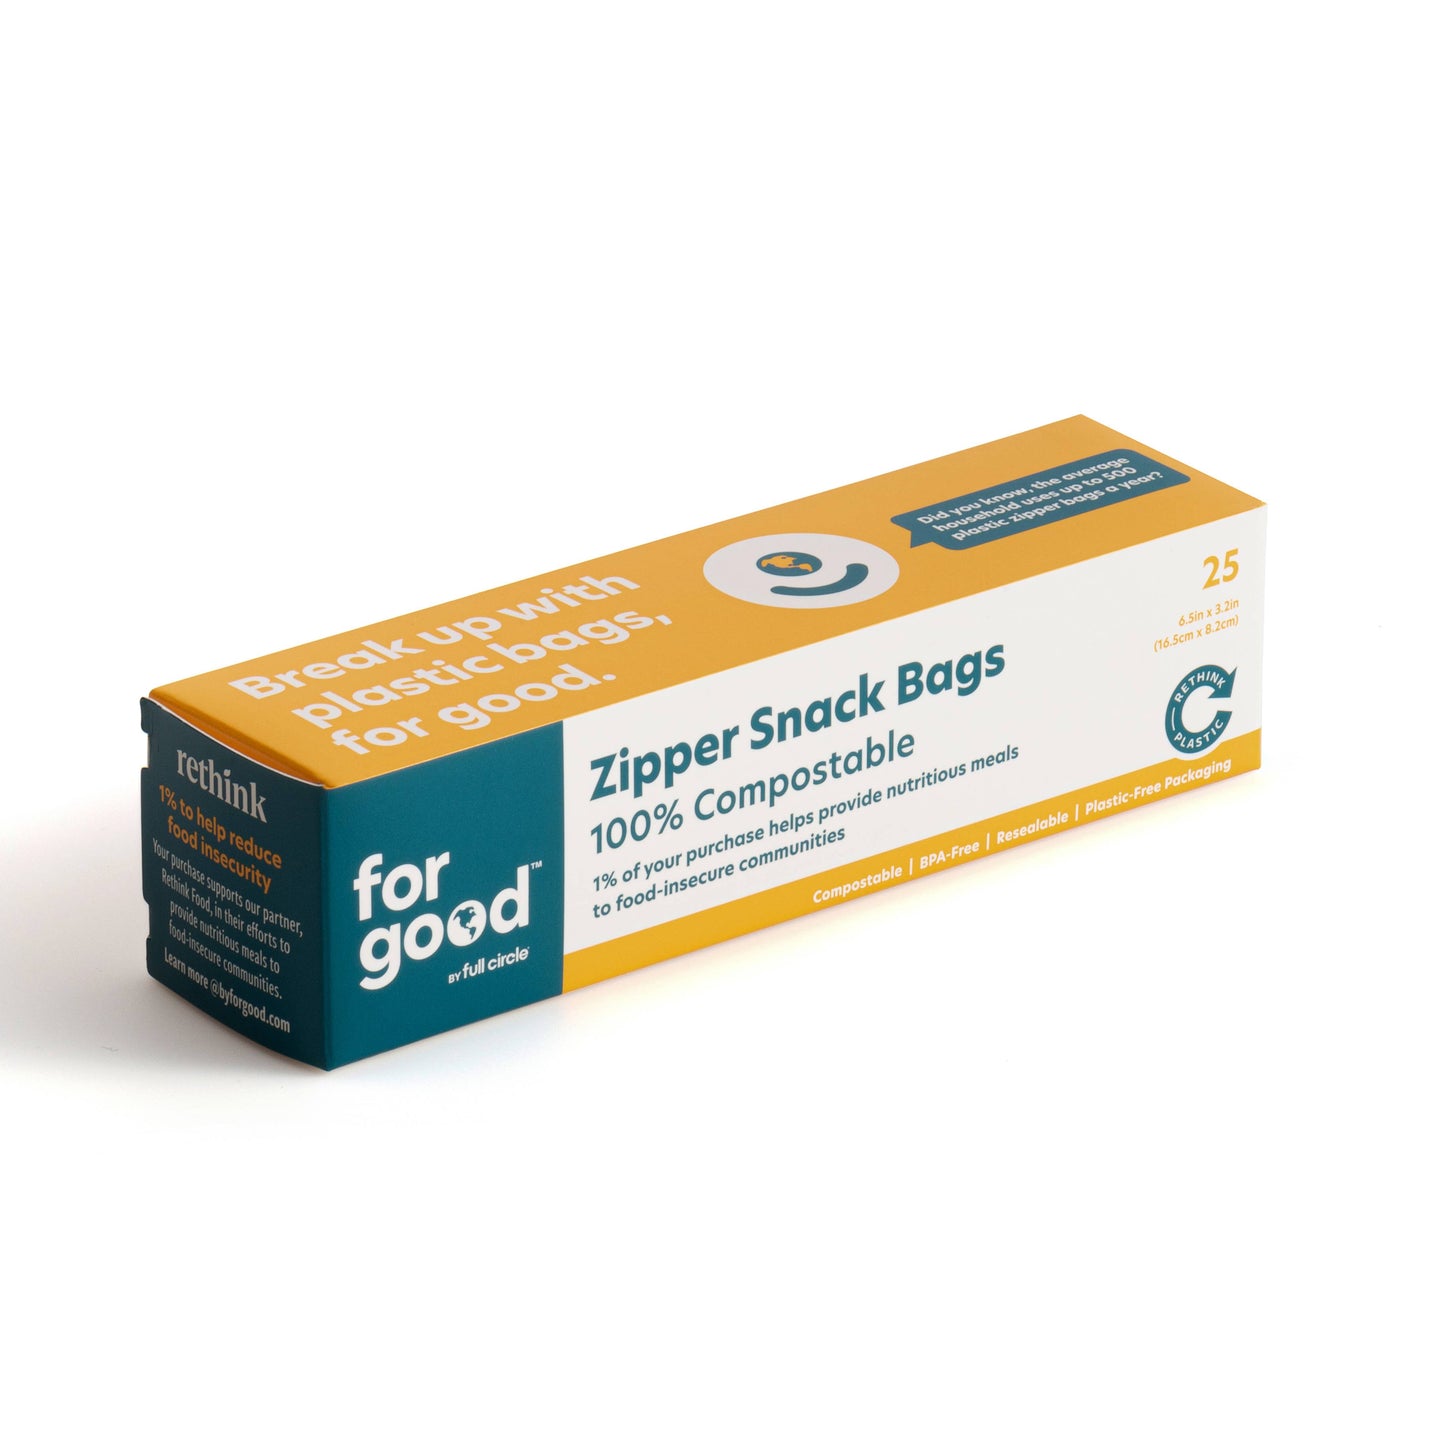 Full Circle Home - For Good Compostable Snack Bags (25pk)